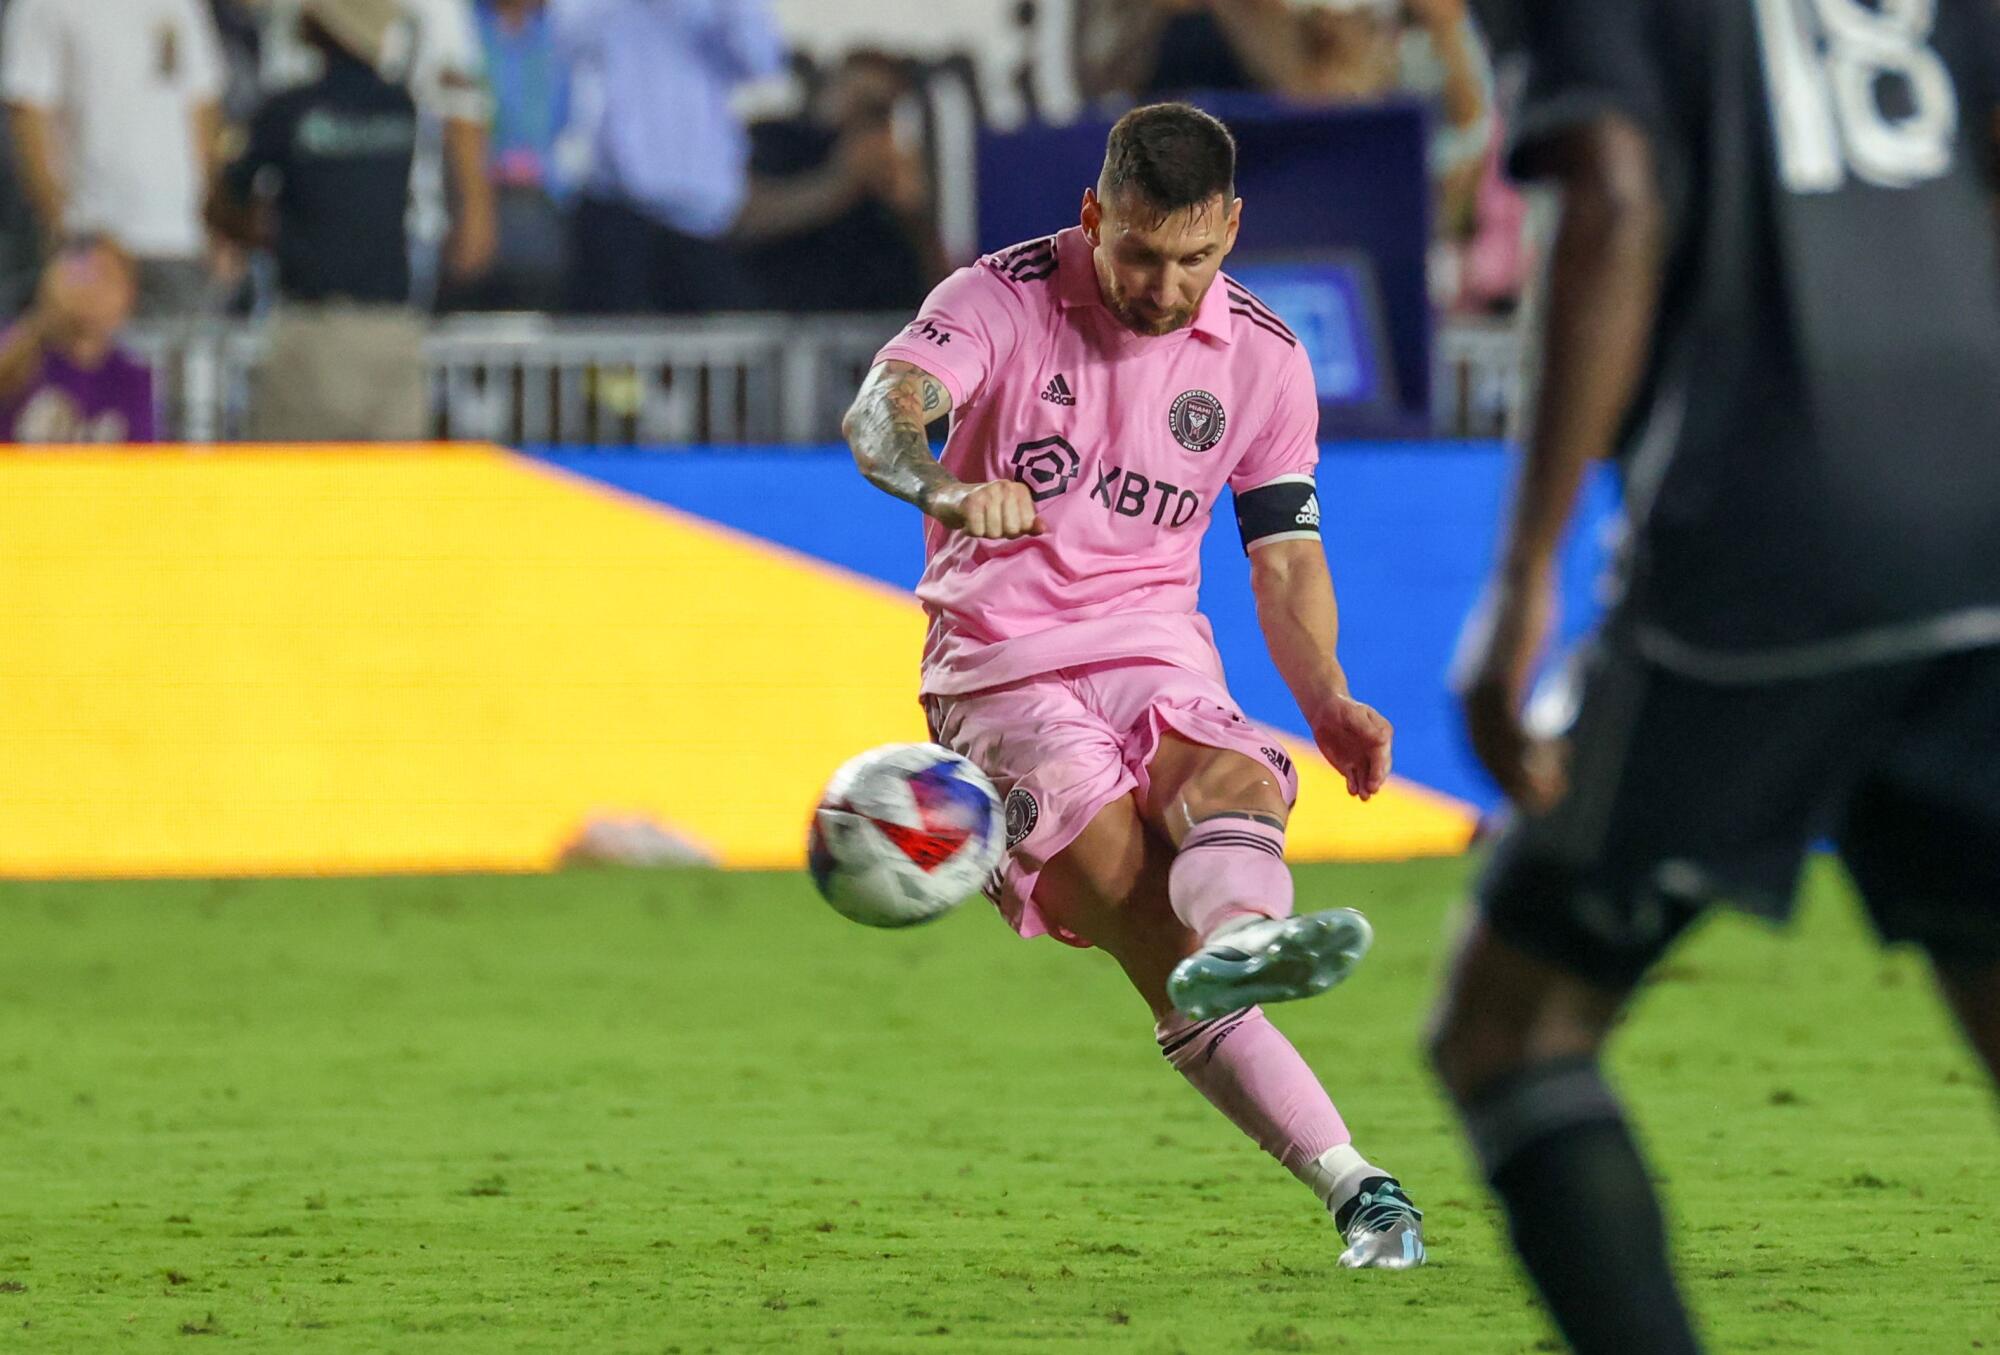 Inter Miami's Lionel Messi takes a free kick during an MLS game.